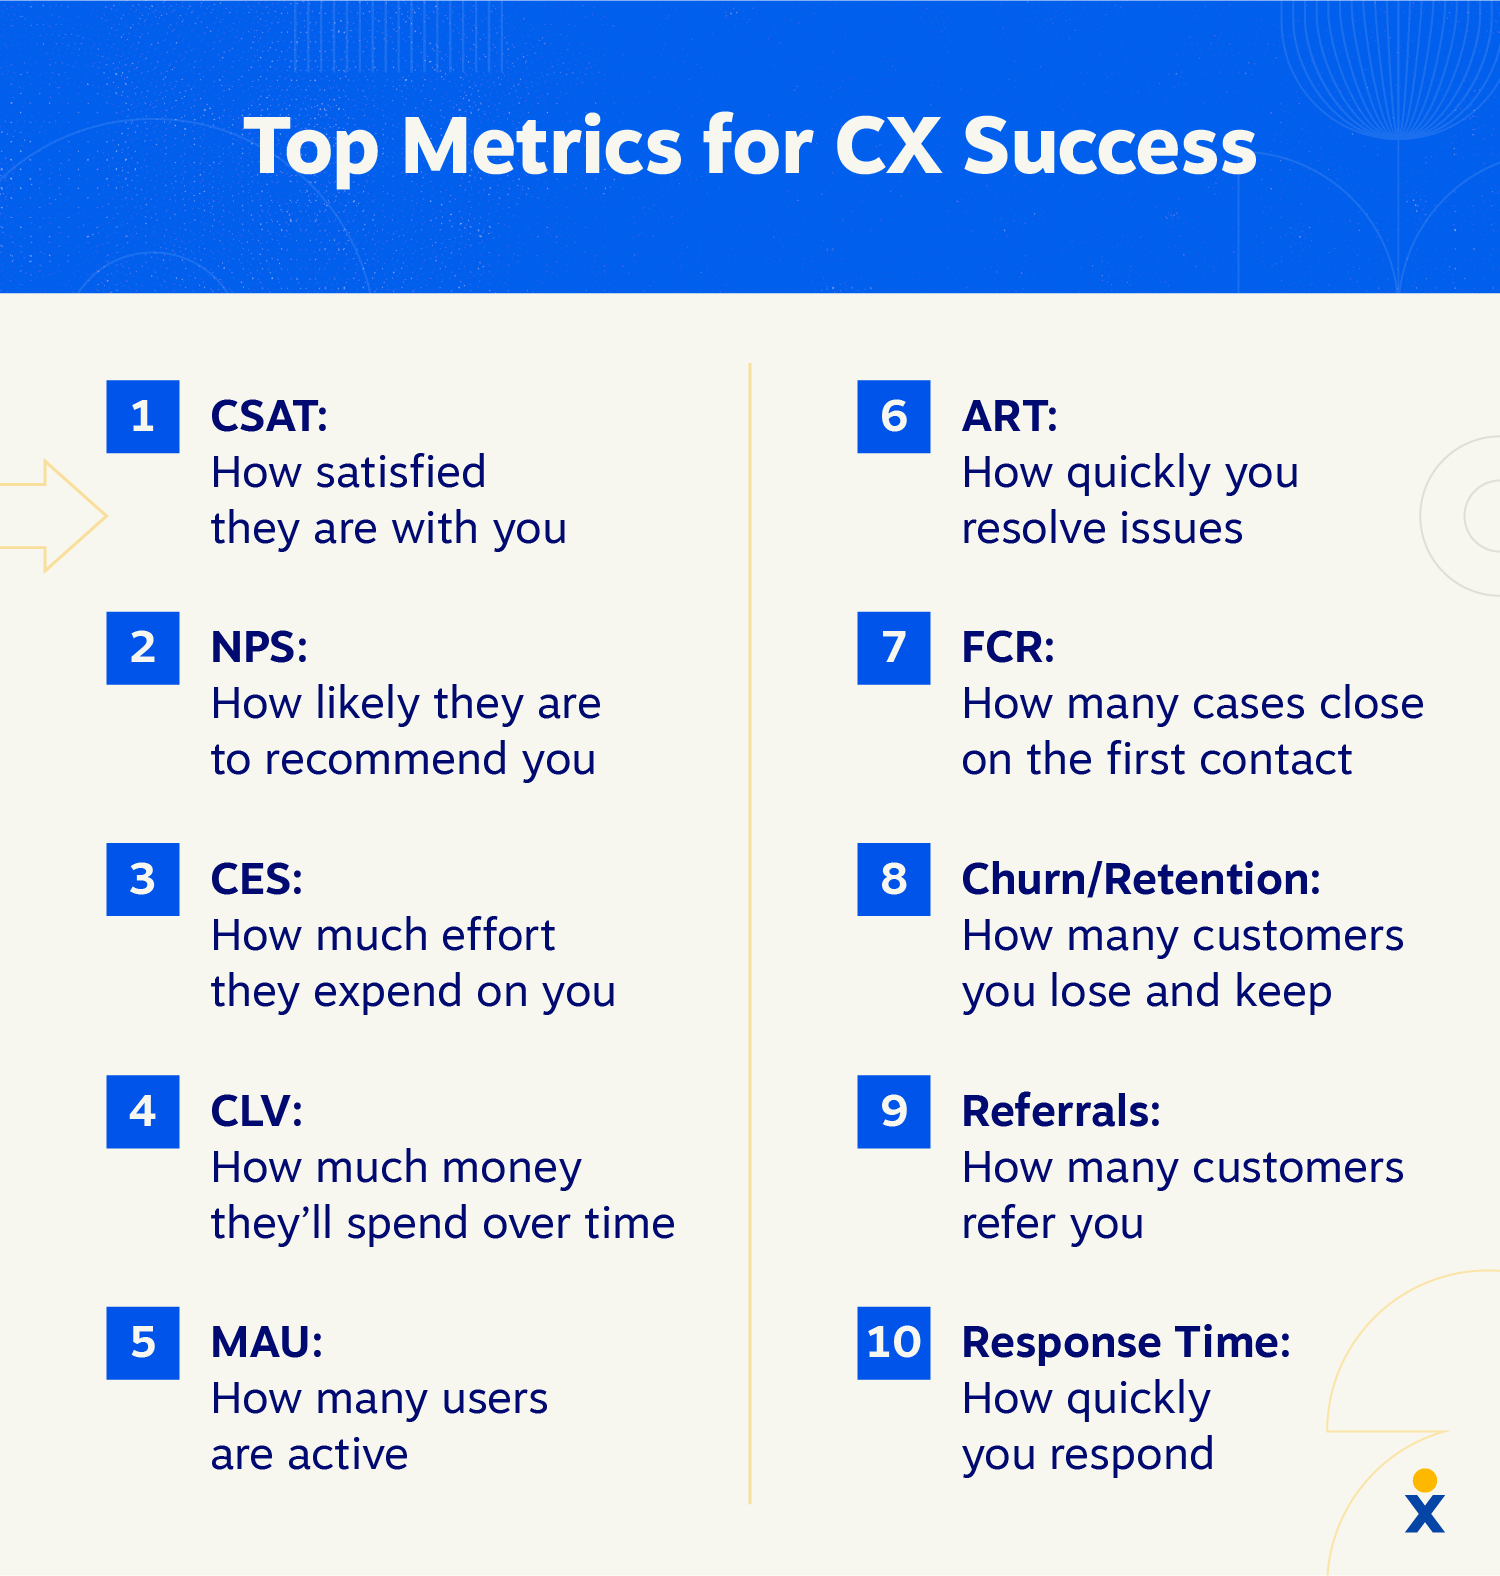 The 10 top metrics for CX Success: CSAT, NPS, CES, CLV, MAU, ART, FCR, Churn/Retention, Referrals, and Response Time.